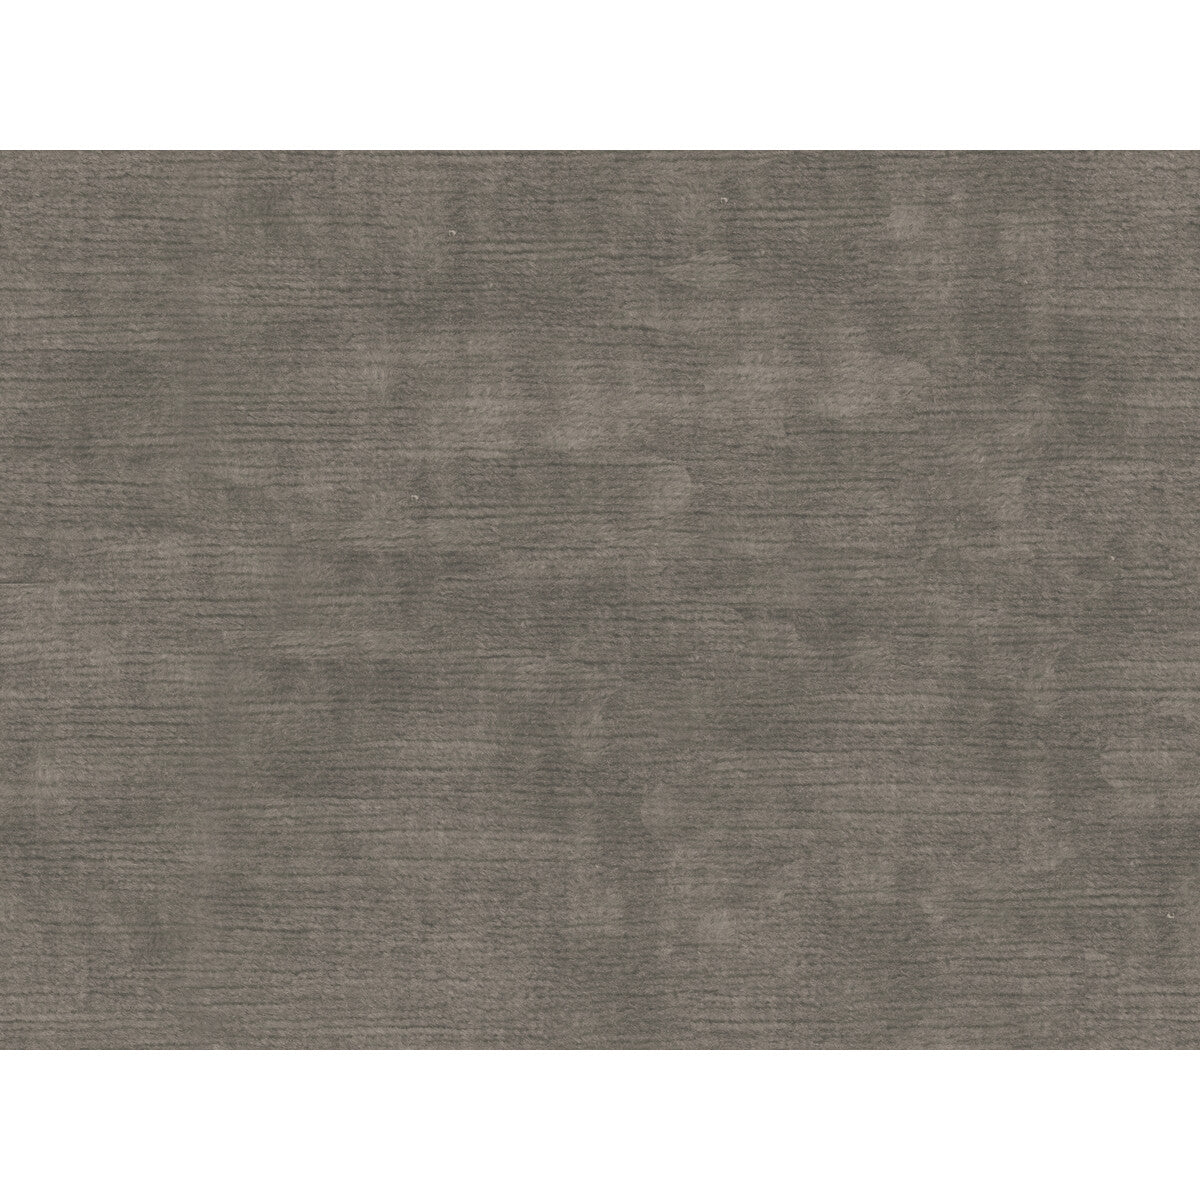 Fulham Linen V fabric in pebble color - pattern 2016133.611.0 - by Lee Jofa